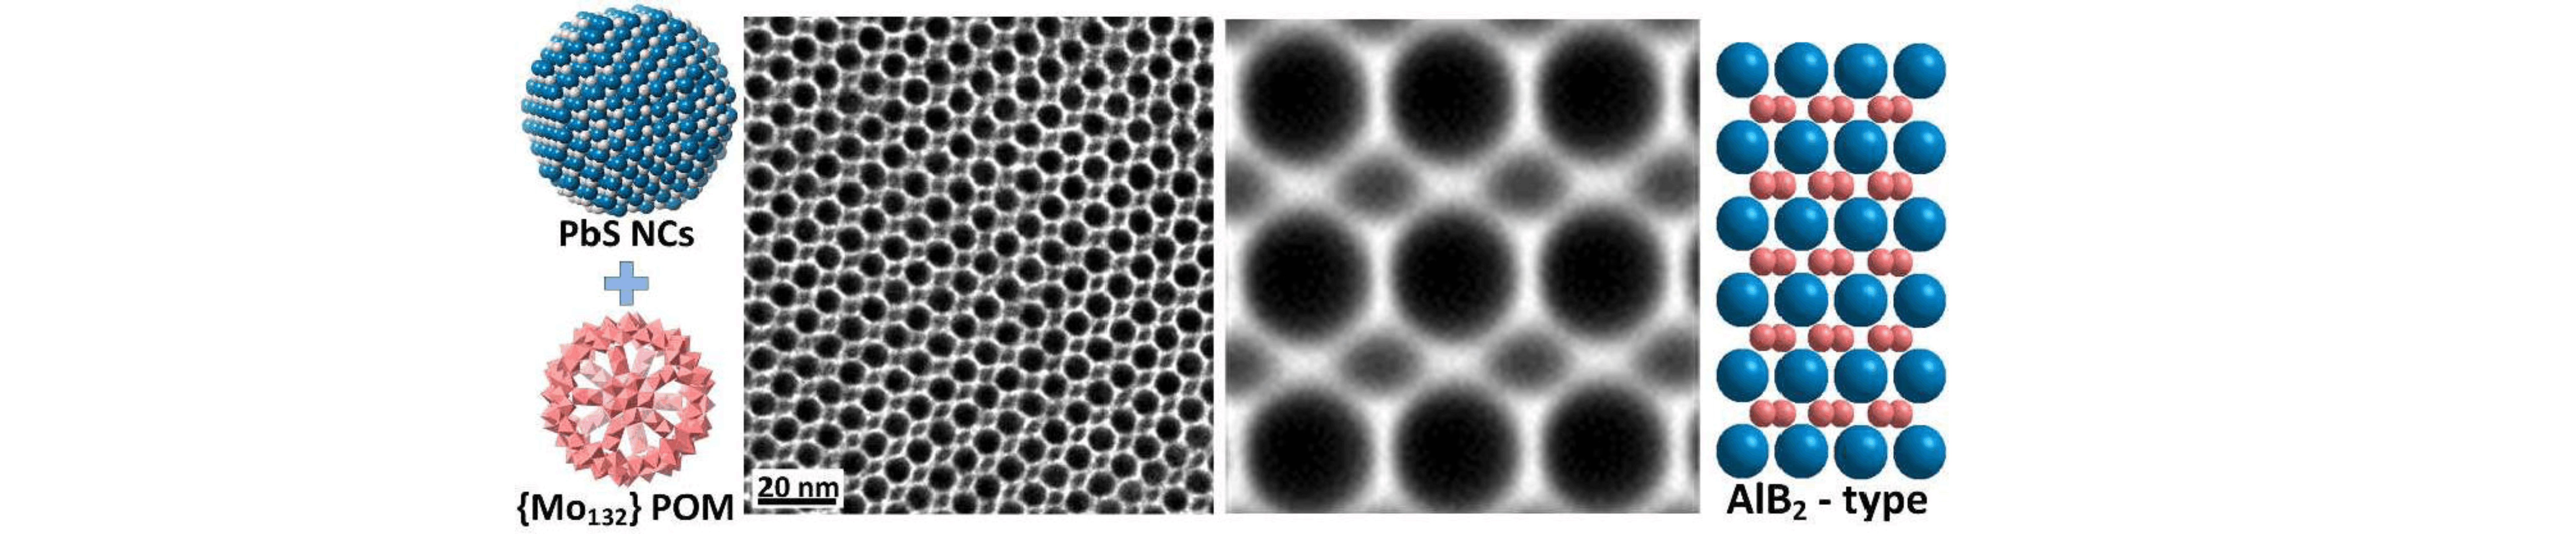 Binary Superlattices from Colloidal Nanocrystals and Giant Polyoxometalate Clusters